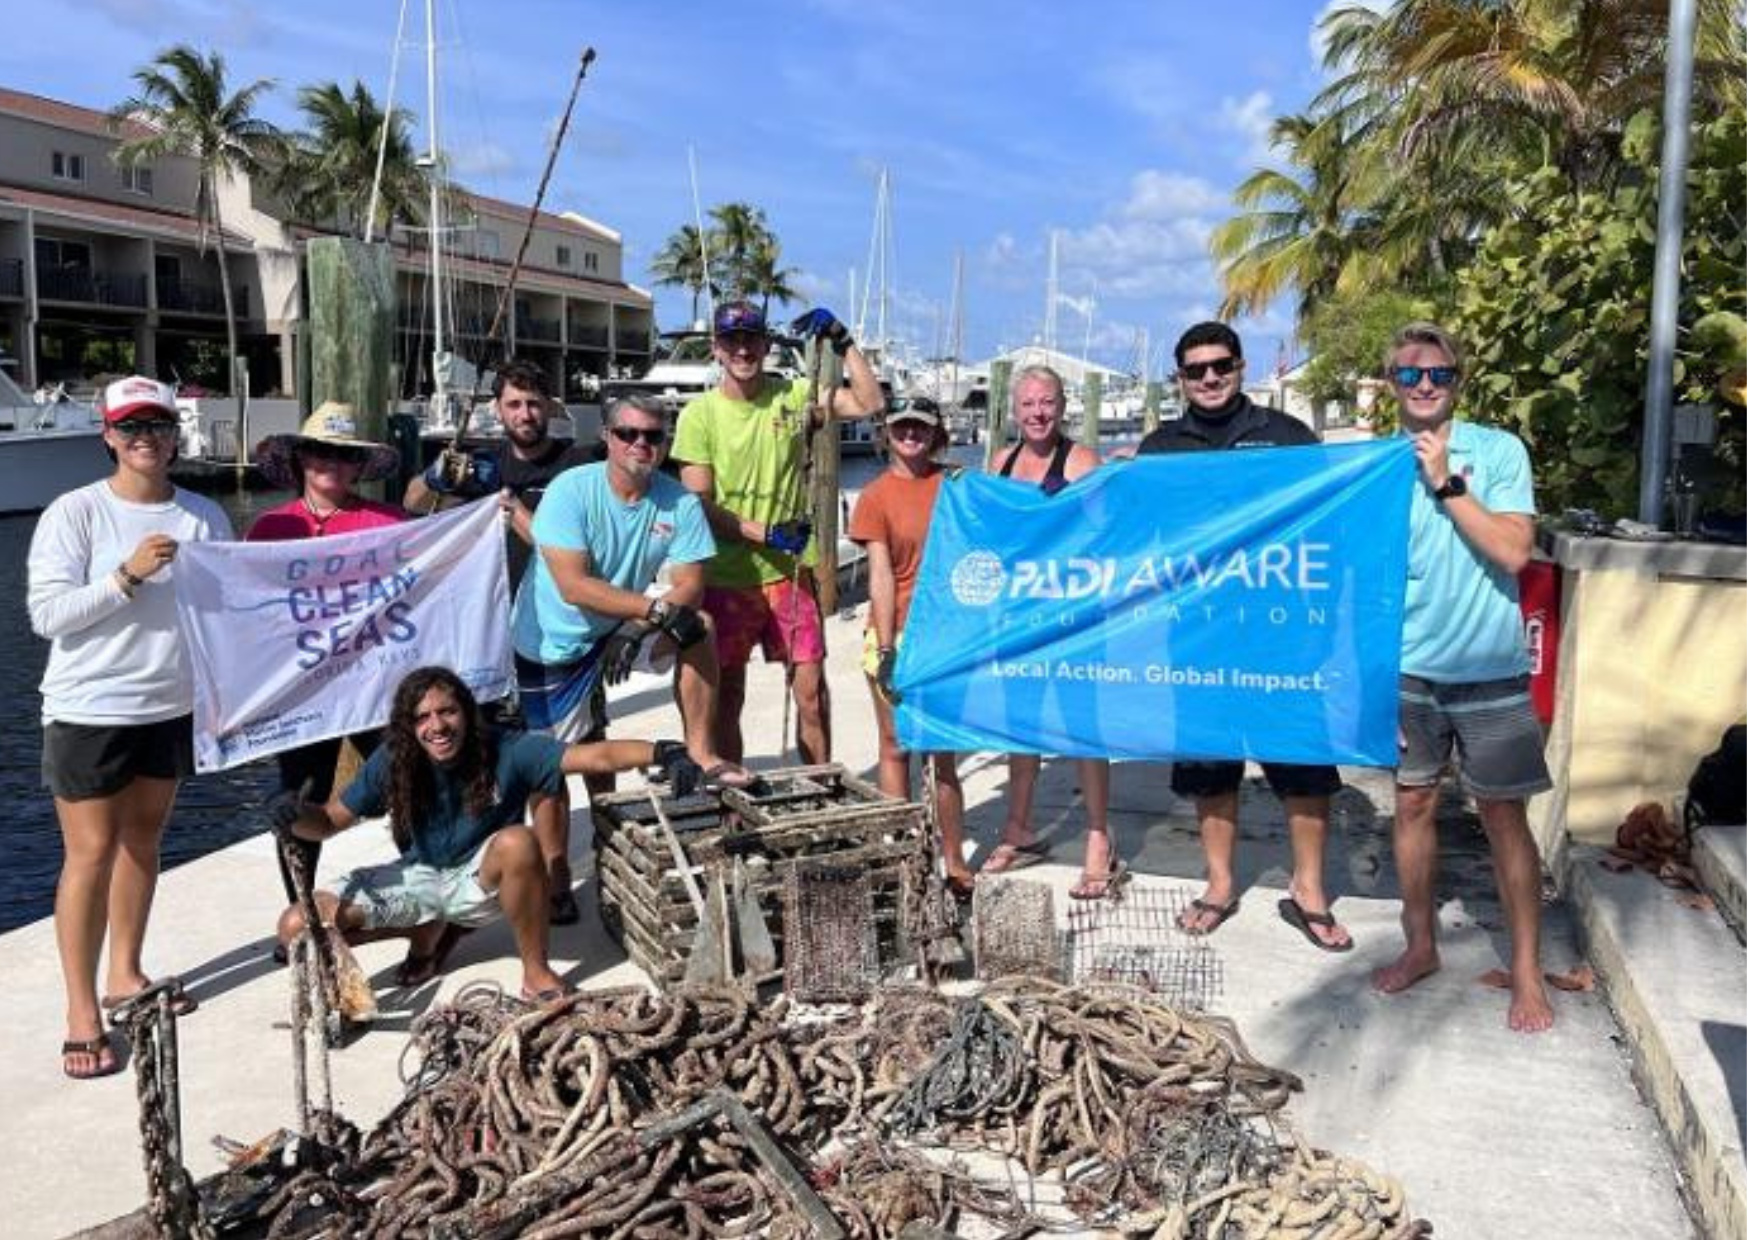 A group of people hold PADI AWARE signs up in front of a pile of marine debris that was recently removed from the ocean